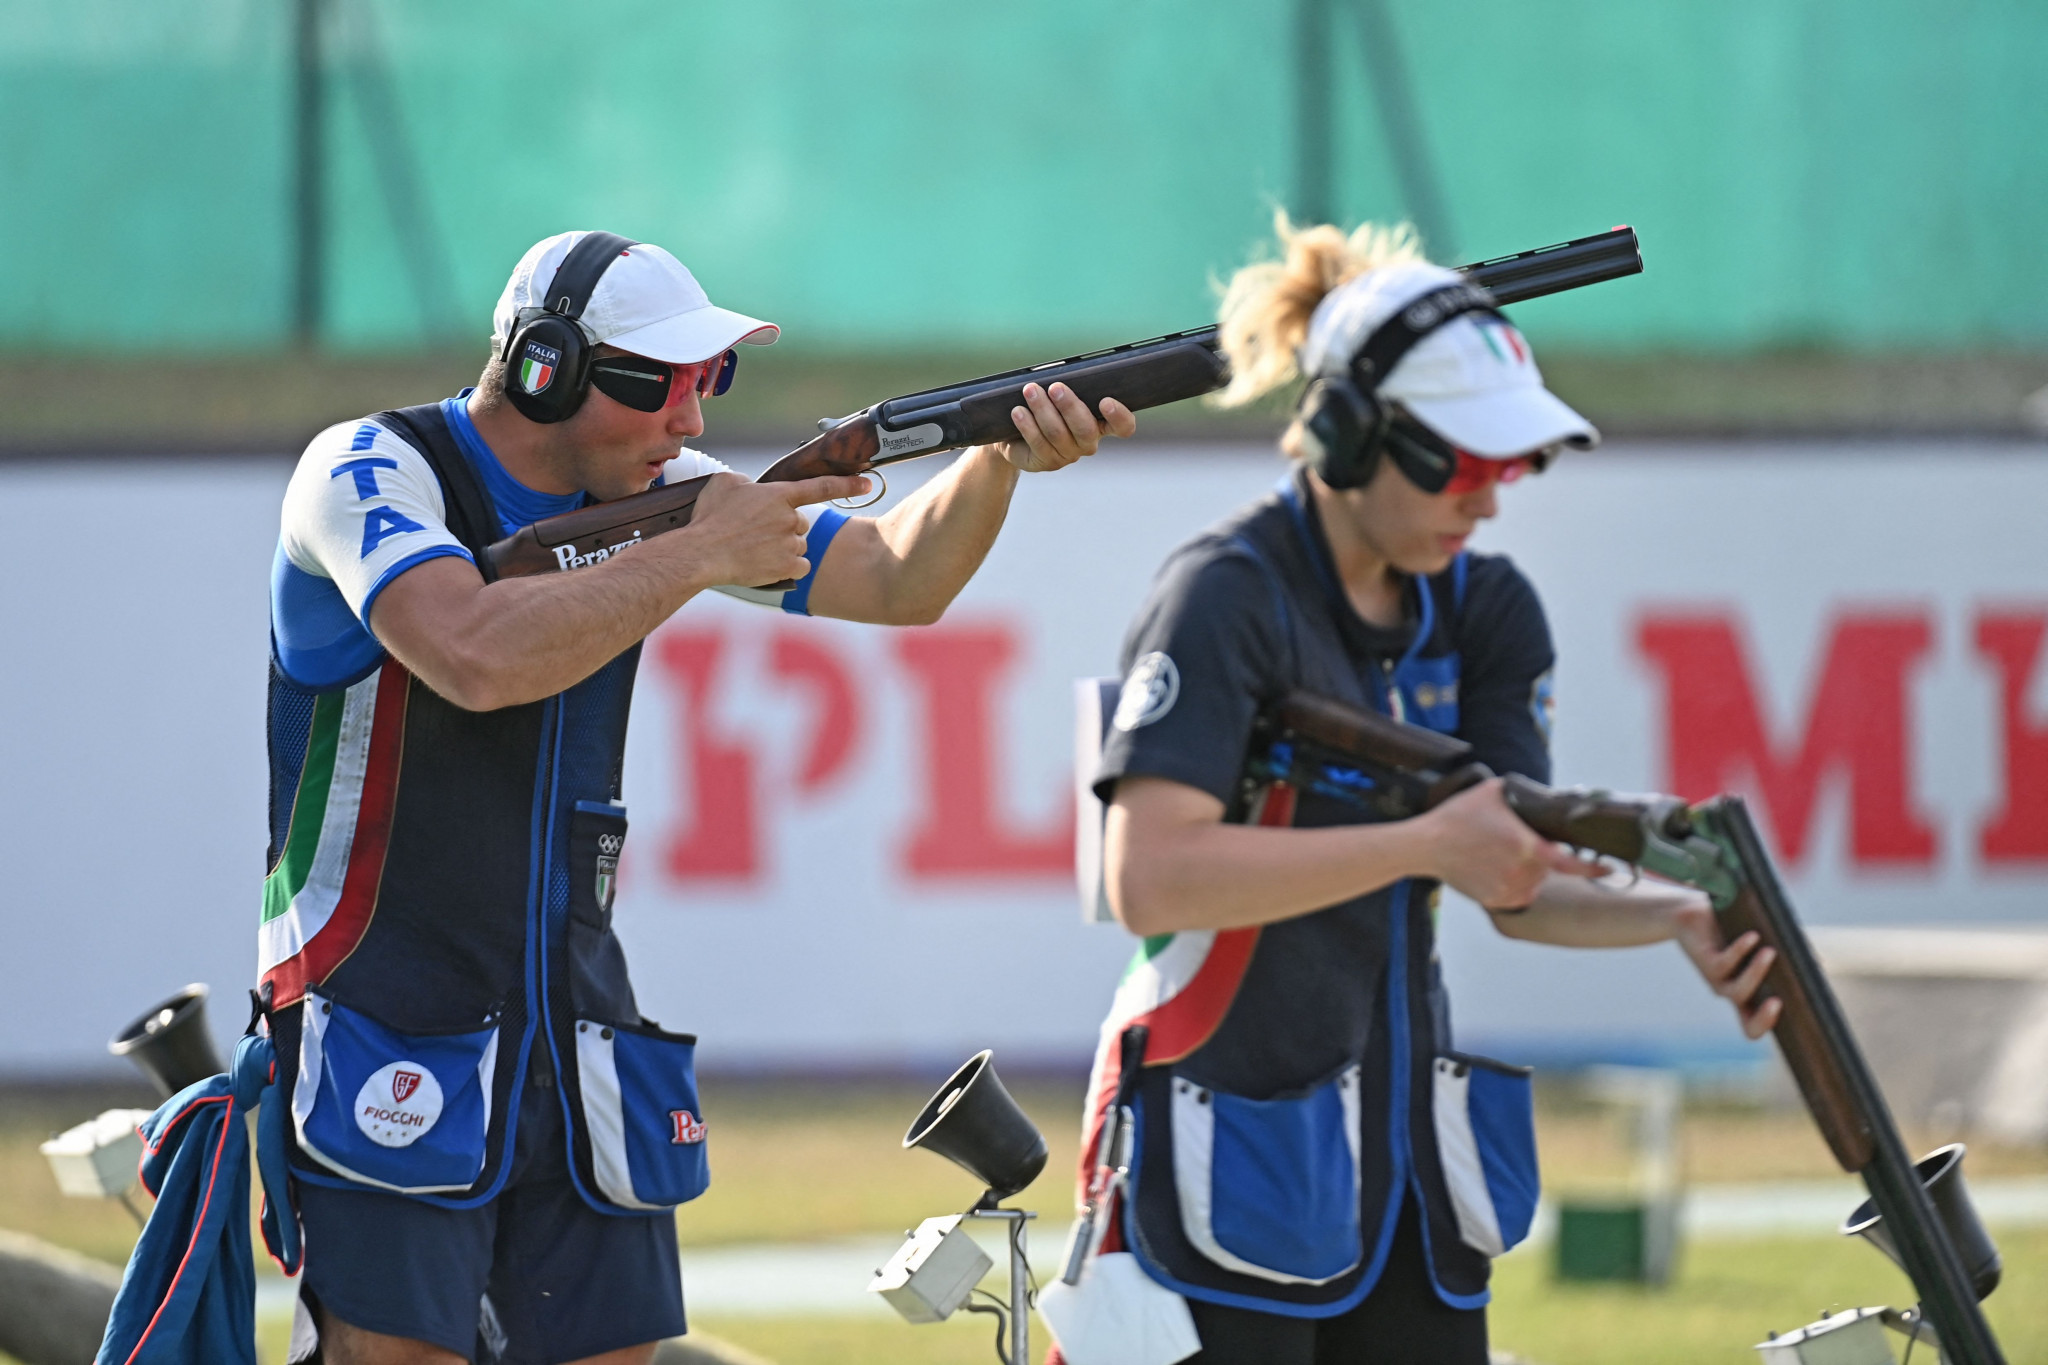 Italy win mixed team trap title at ISSF World Cup in New Delhi